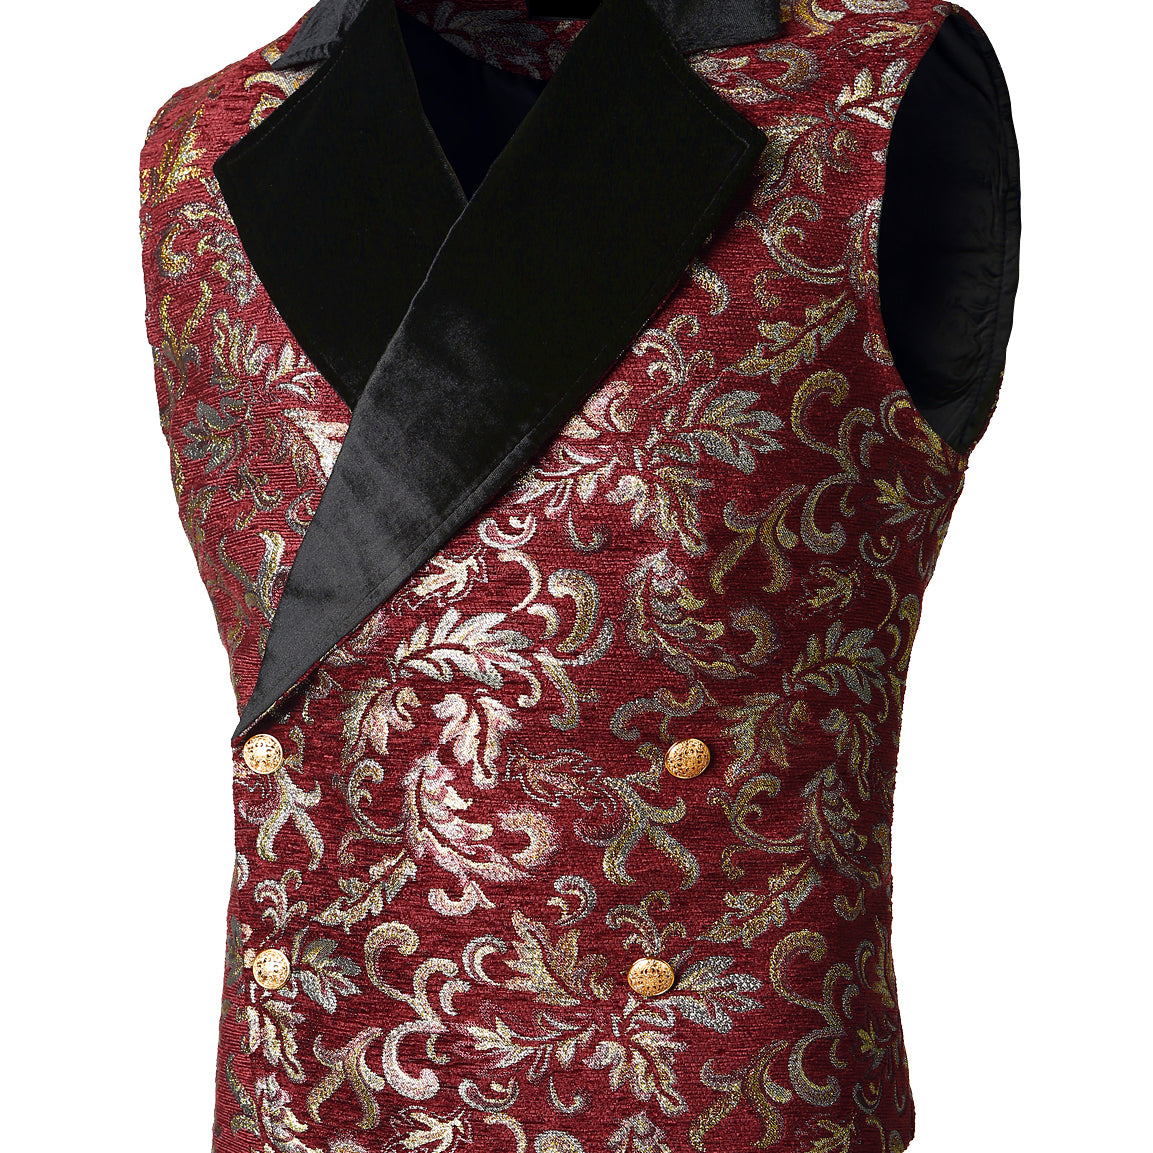 Mens Victorian Double Breasted Vest Vintage Floral Navy Blue Gothic Steampunk Waistcoat